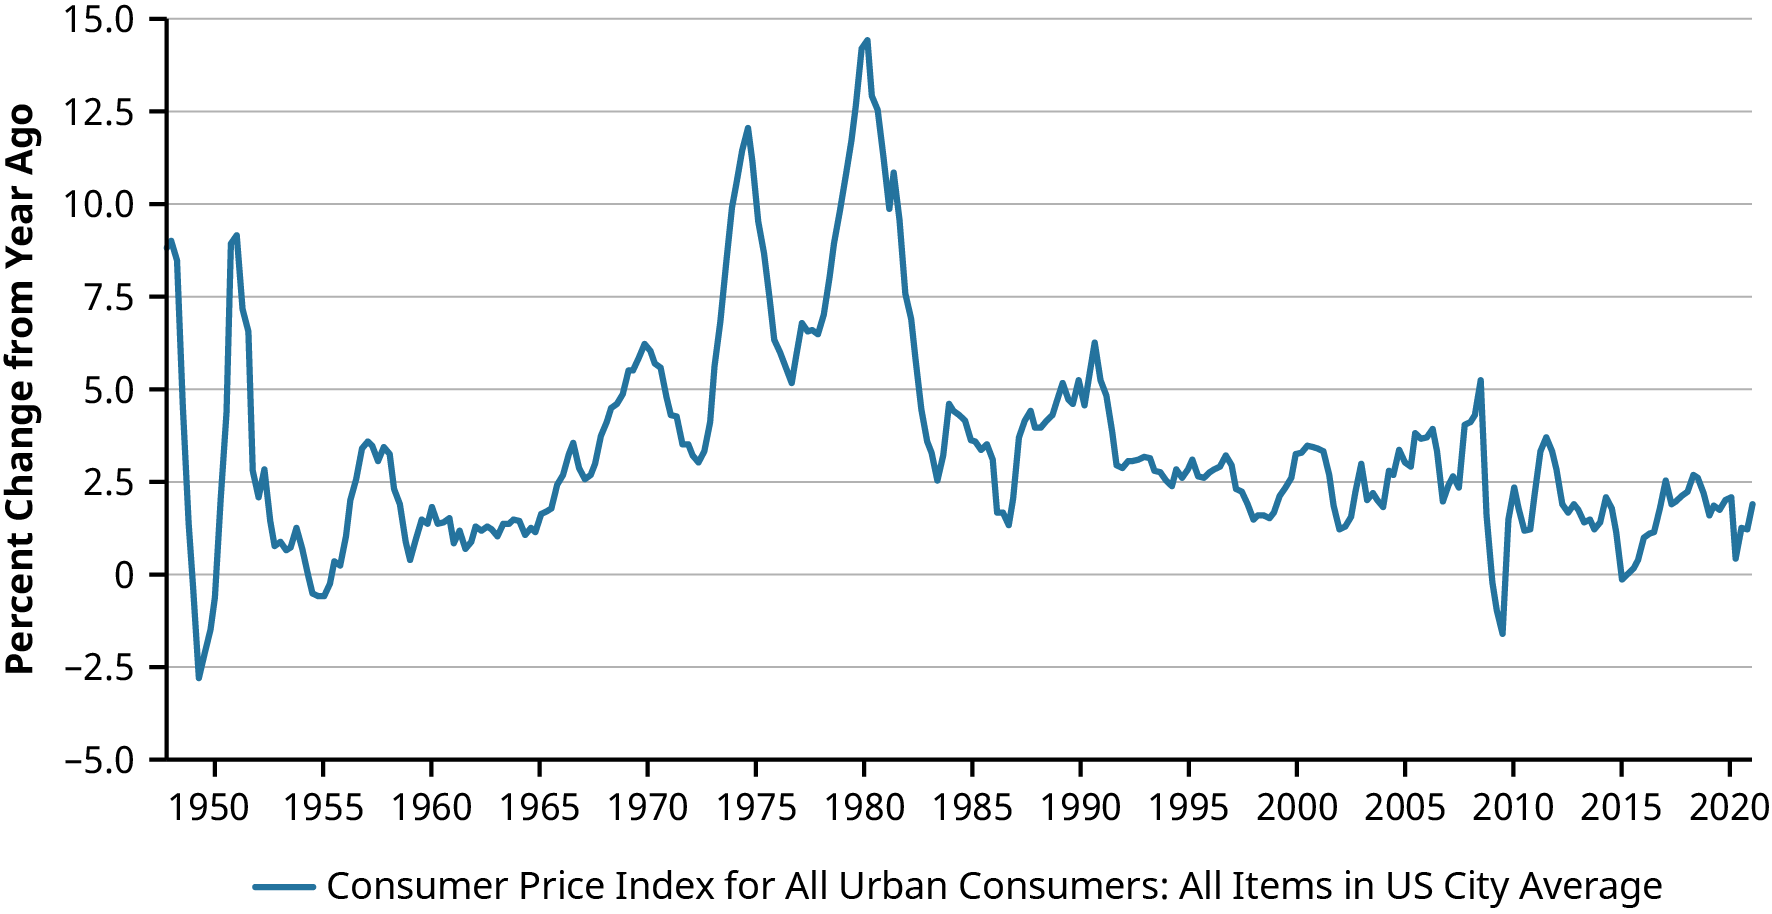 Rate of inflation measured by the Consumer Price Index for All Urban Consumers between 1950-2020. It shows that the percentage change in the consumer price index was the highest in 1980, while it has remained between -2.5% to 7.5% since then.